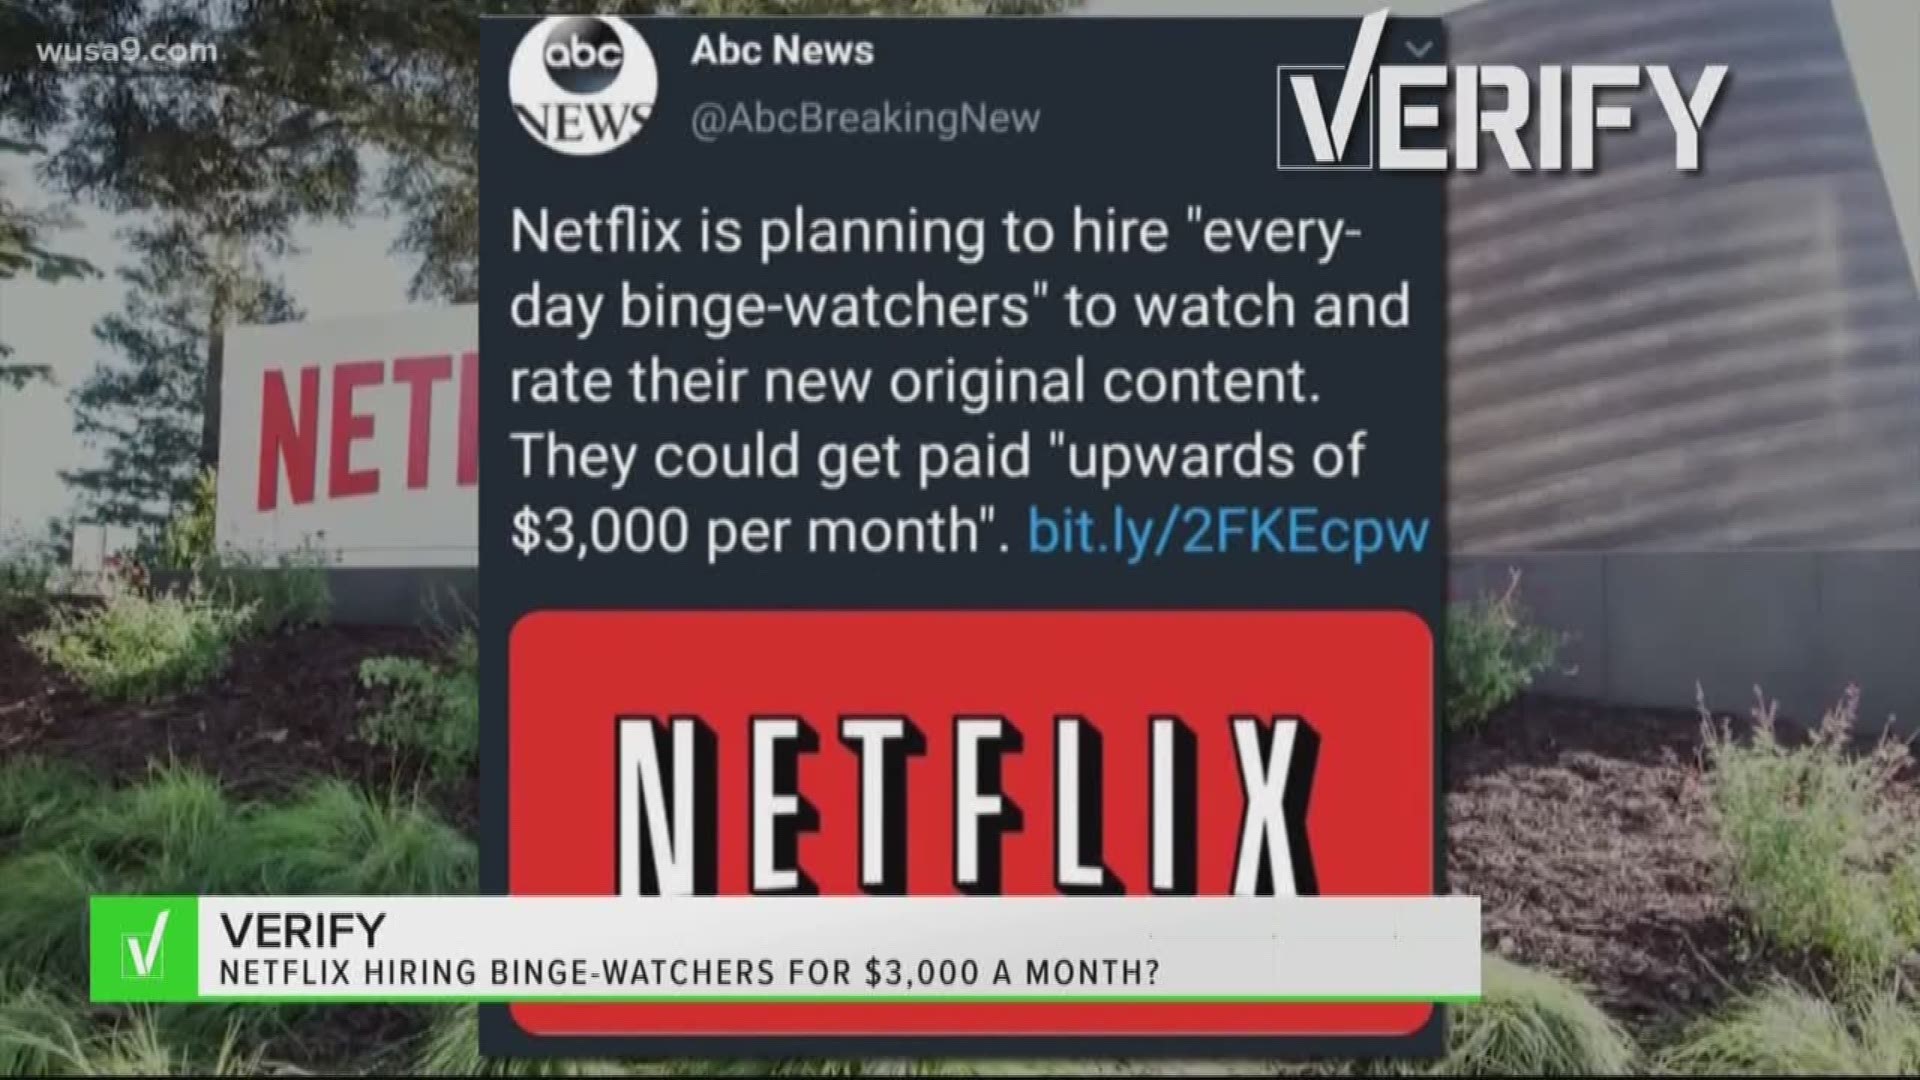 There are currently no open jobs for binge watchers, but there were as recently as March 2018.